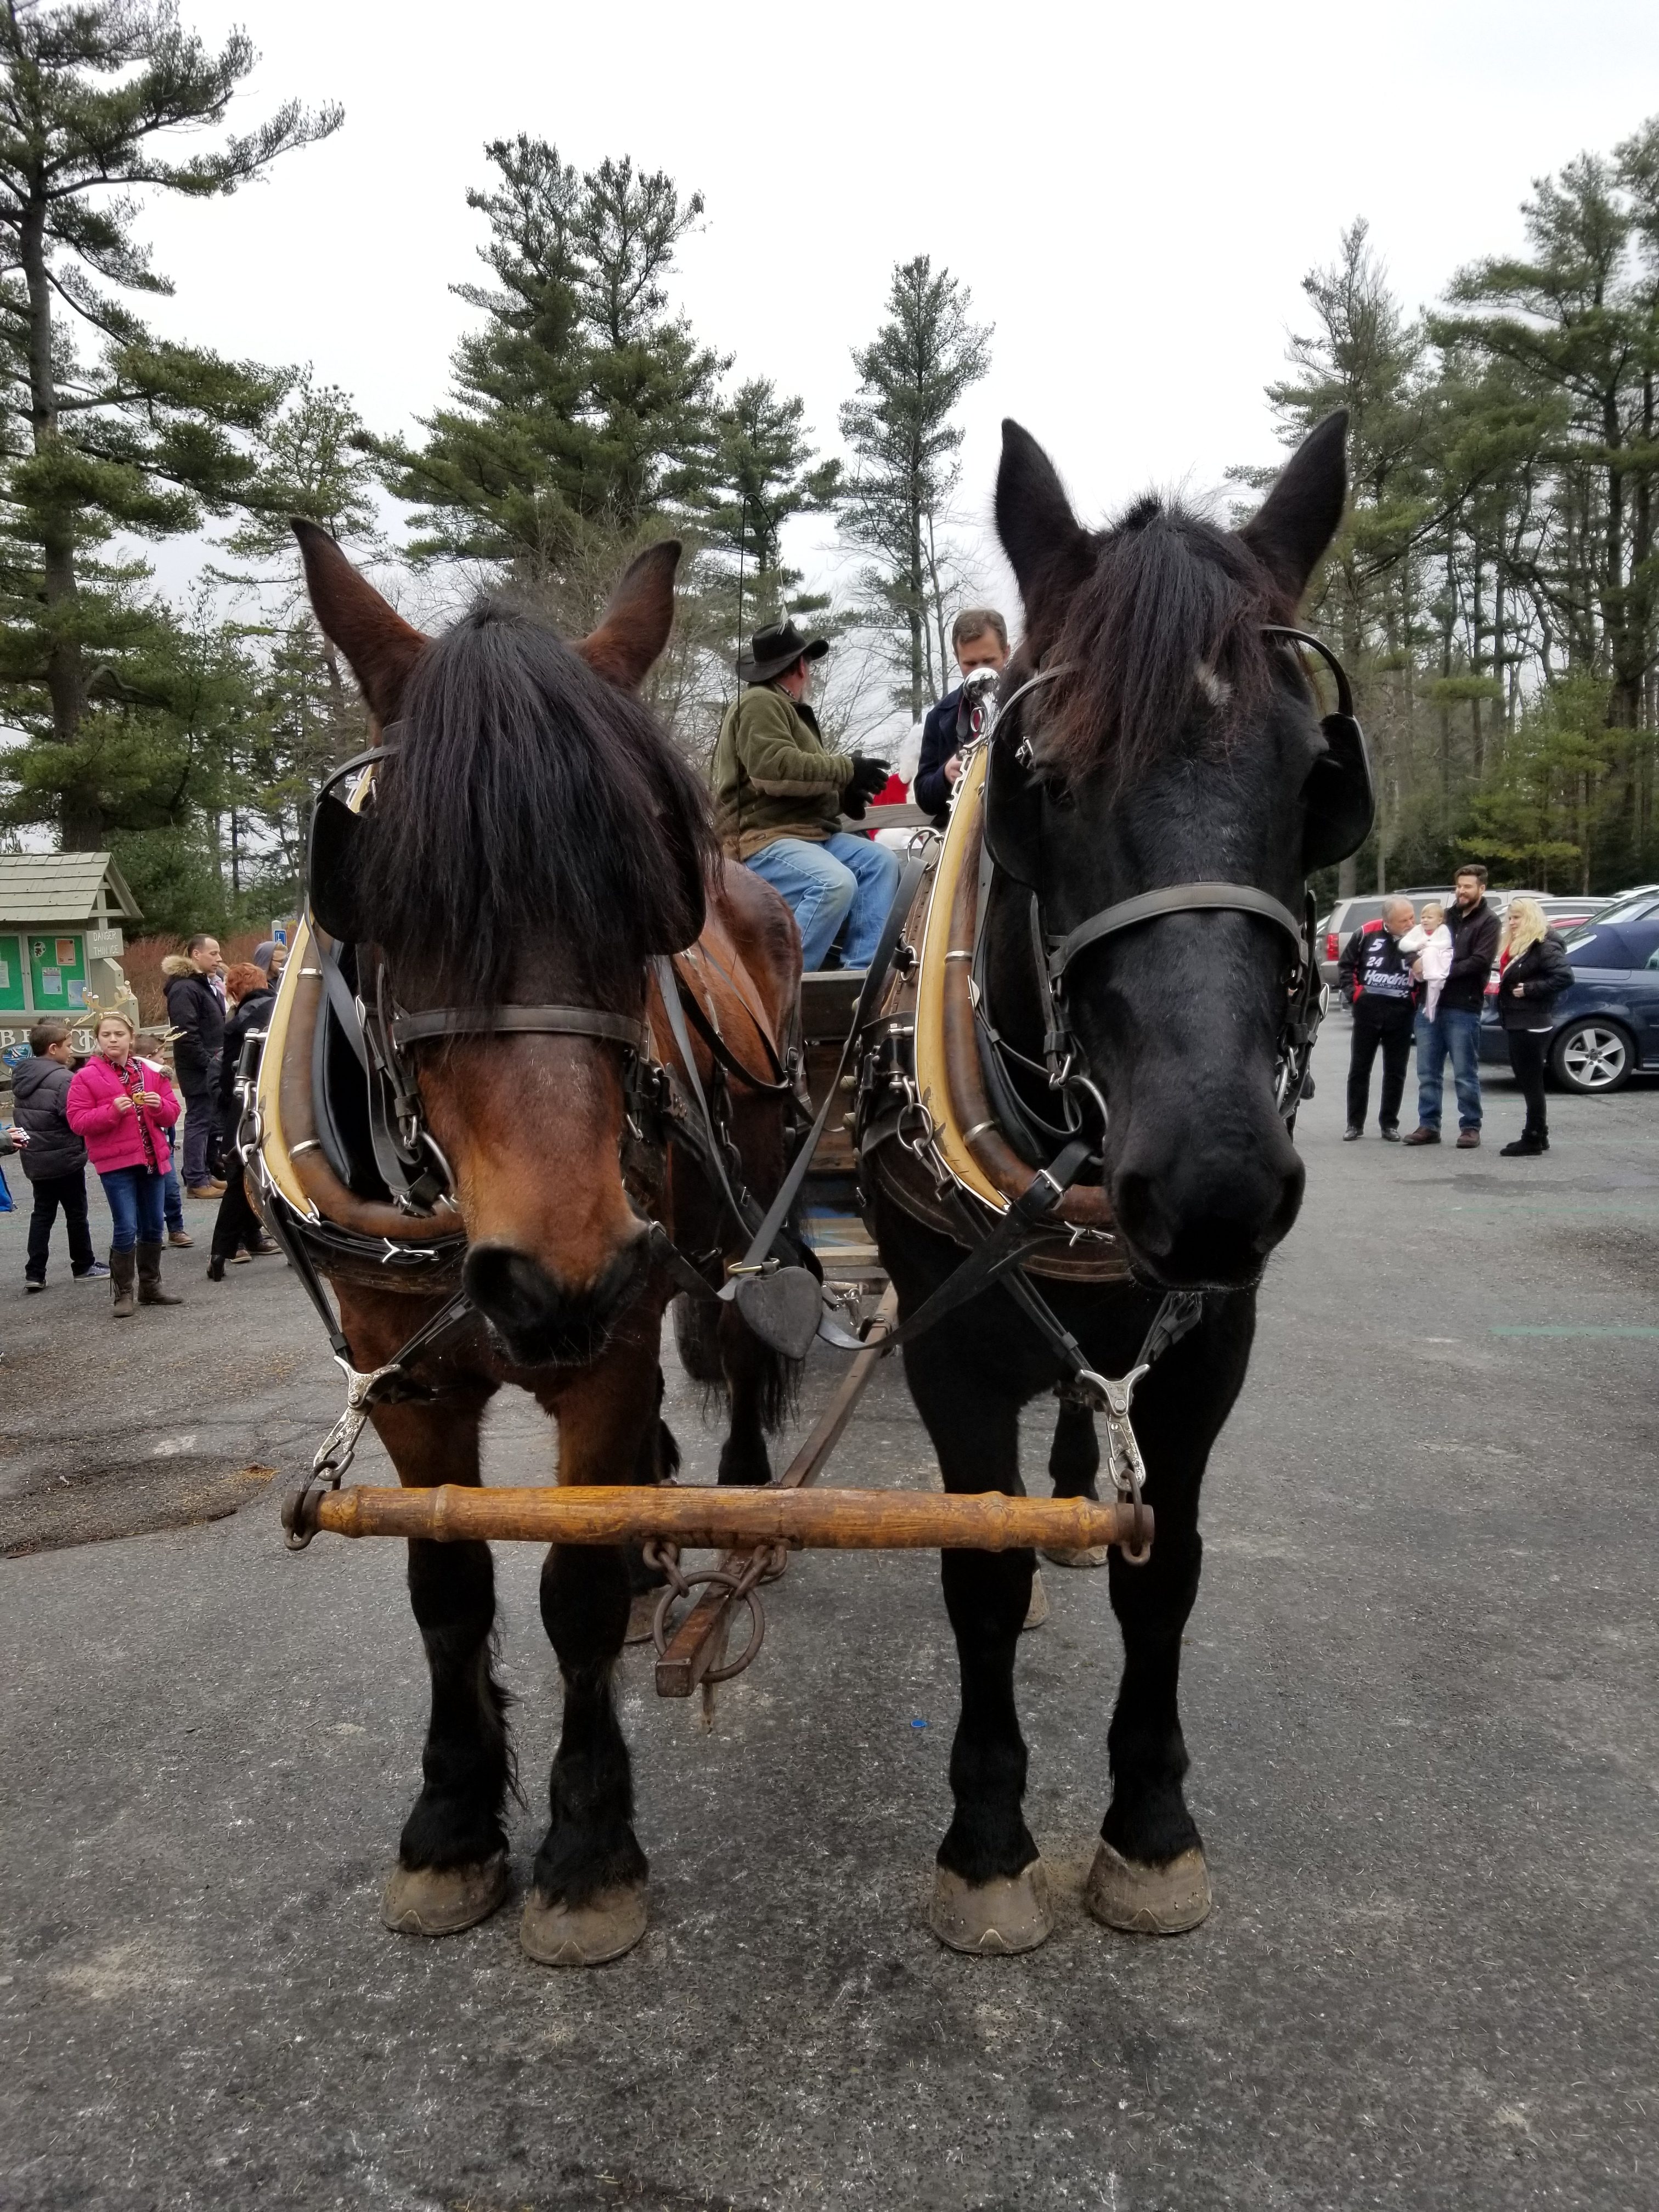 Hudson and Diesel, two percherons, stand harnessed to a wagon.